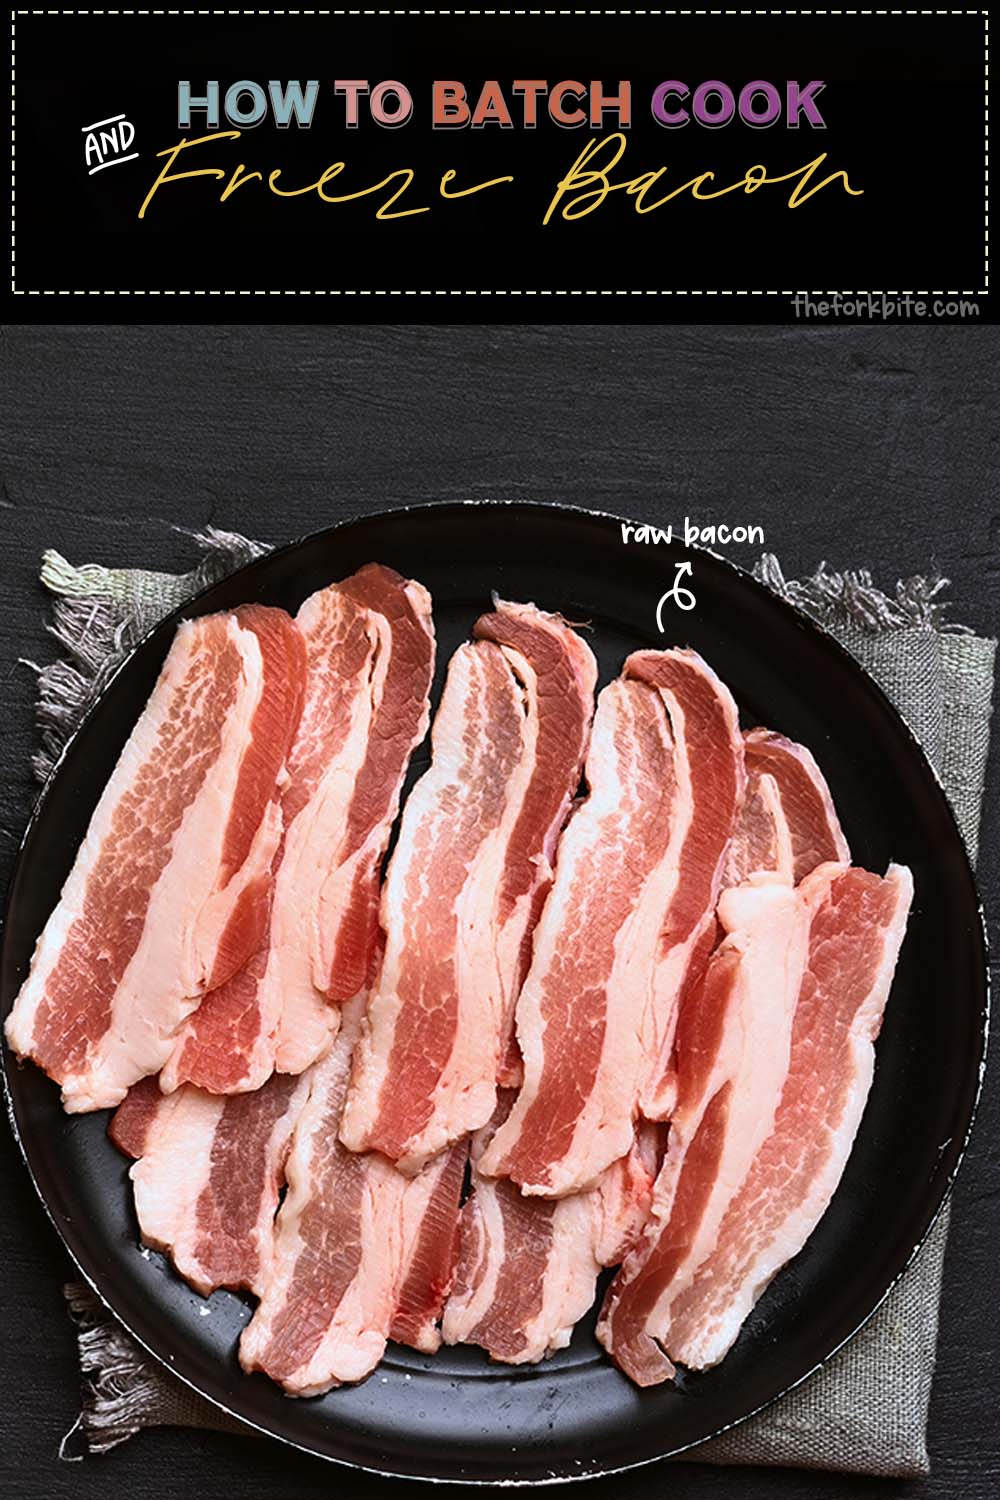 You may not be aware of this, but strips of bacon freeze beautifully. So, when you cook bacon this way, you can prep a large batch and freeze it.